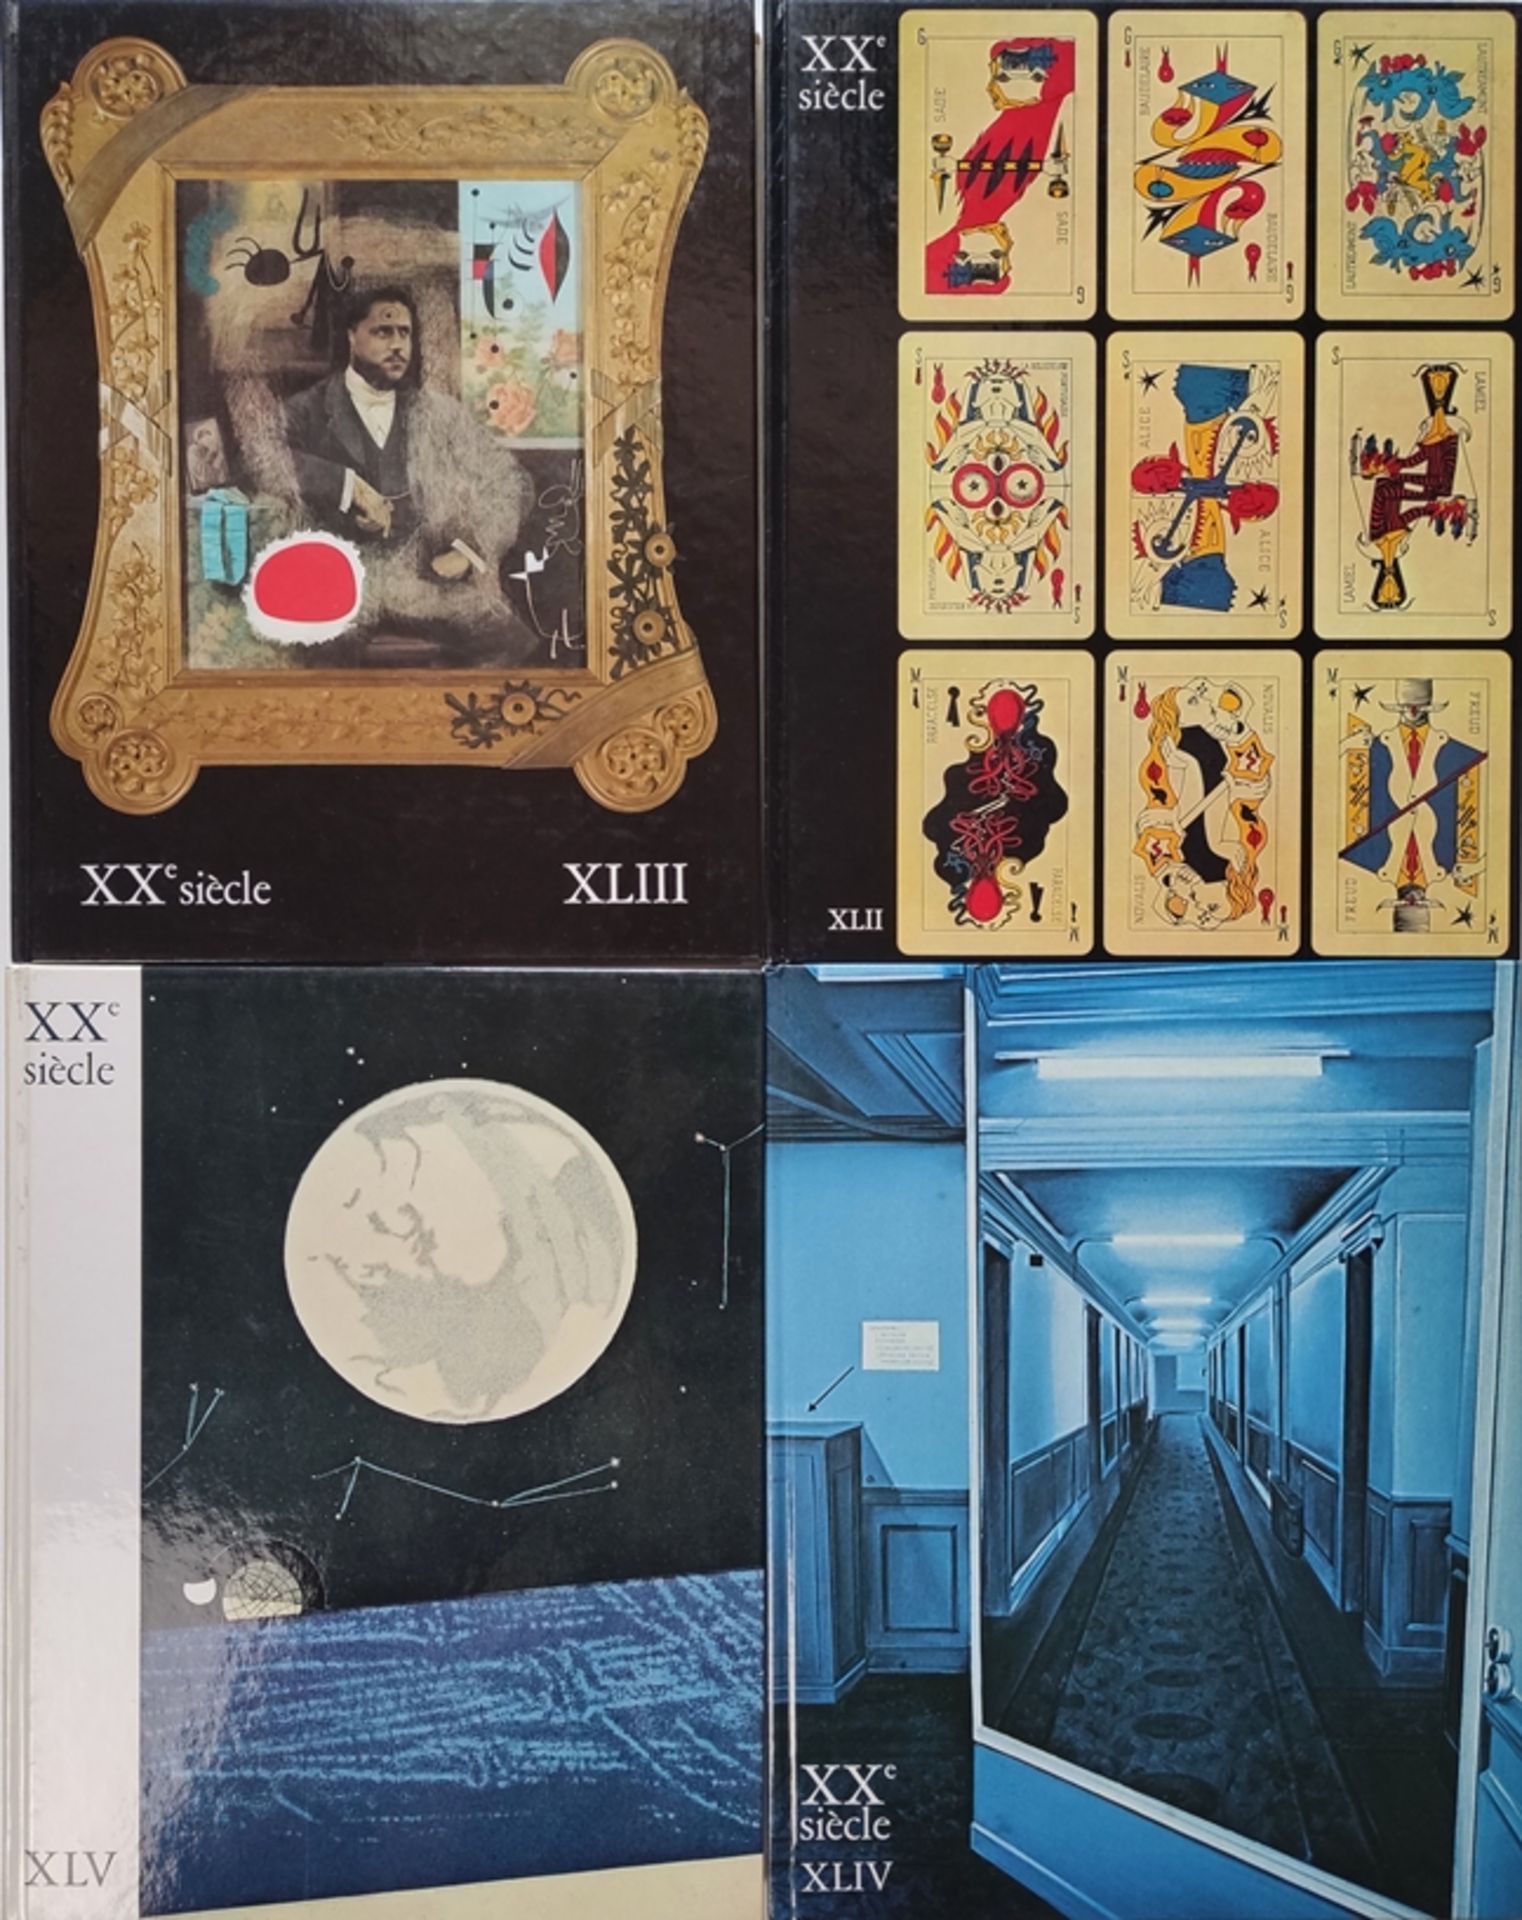 Four art volumes "XXe Siècle. Nouvelle série", in French, consisting of: volume 42, 1974, "Panorama